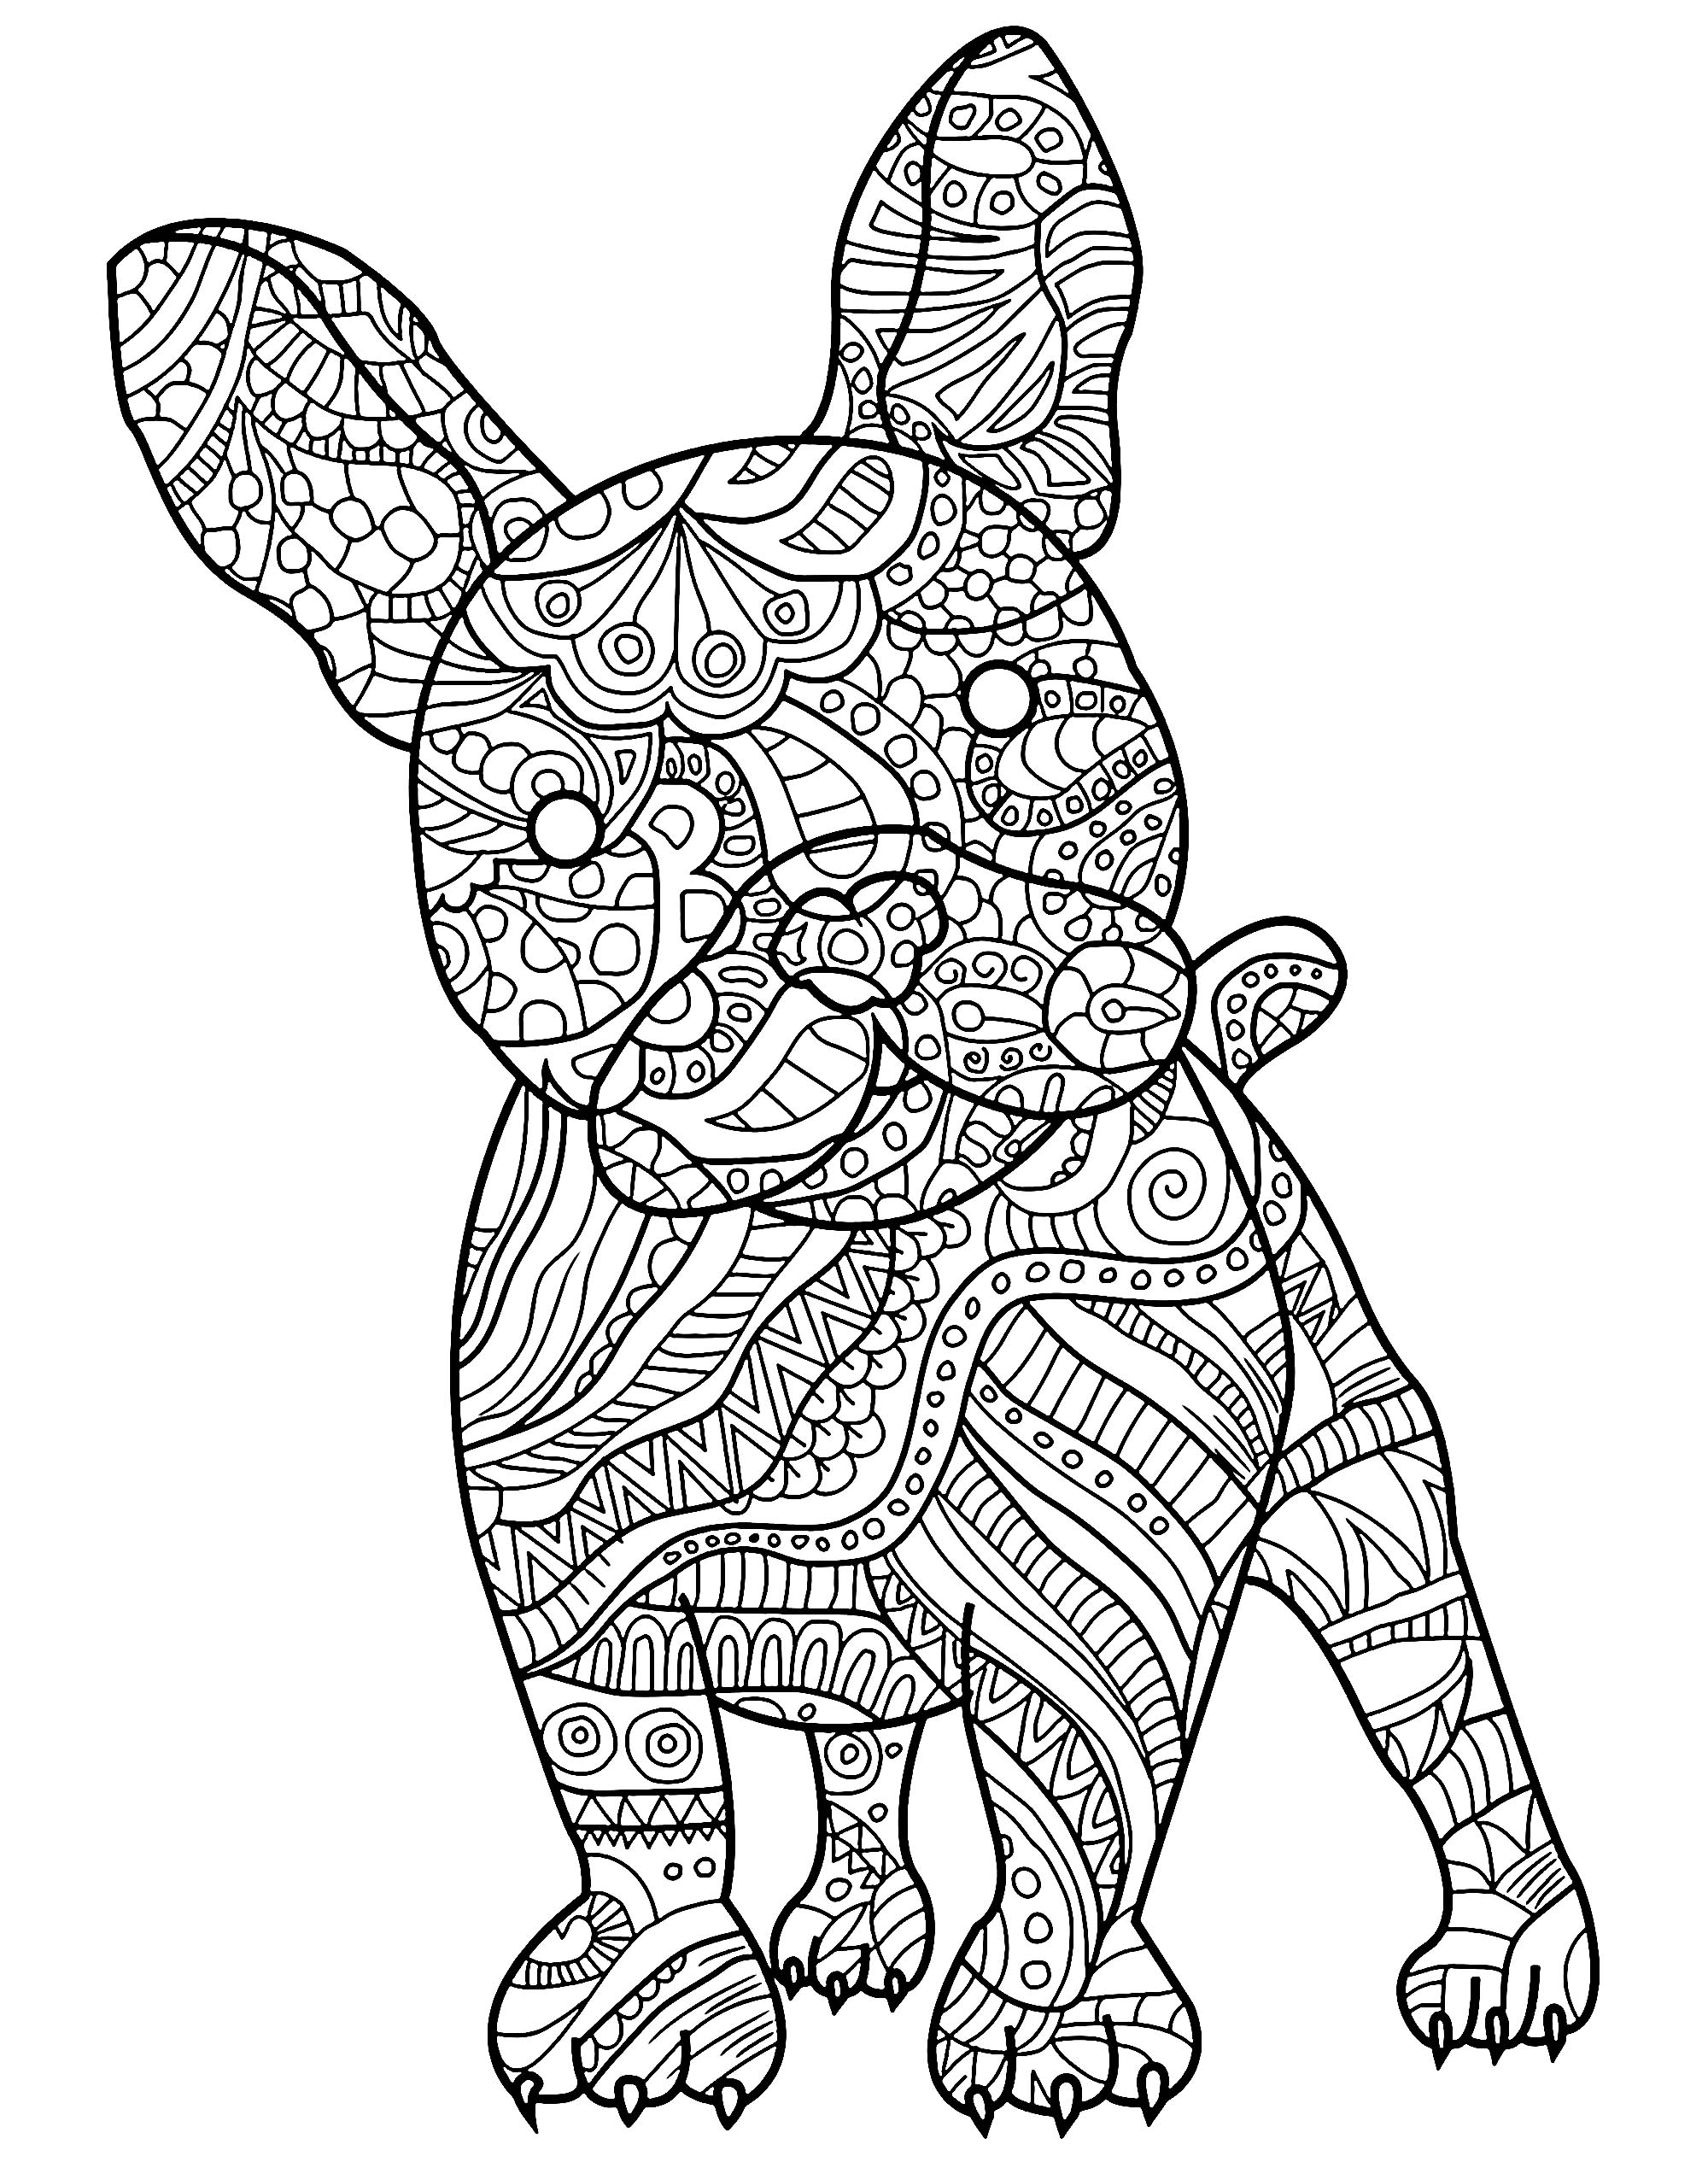 Download Dog to download for free - Dogs Kids Coloring Pages